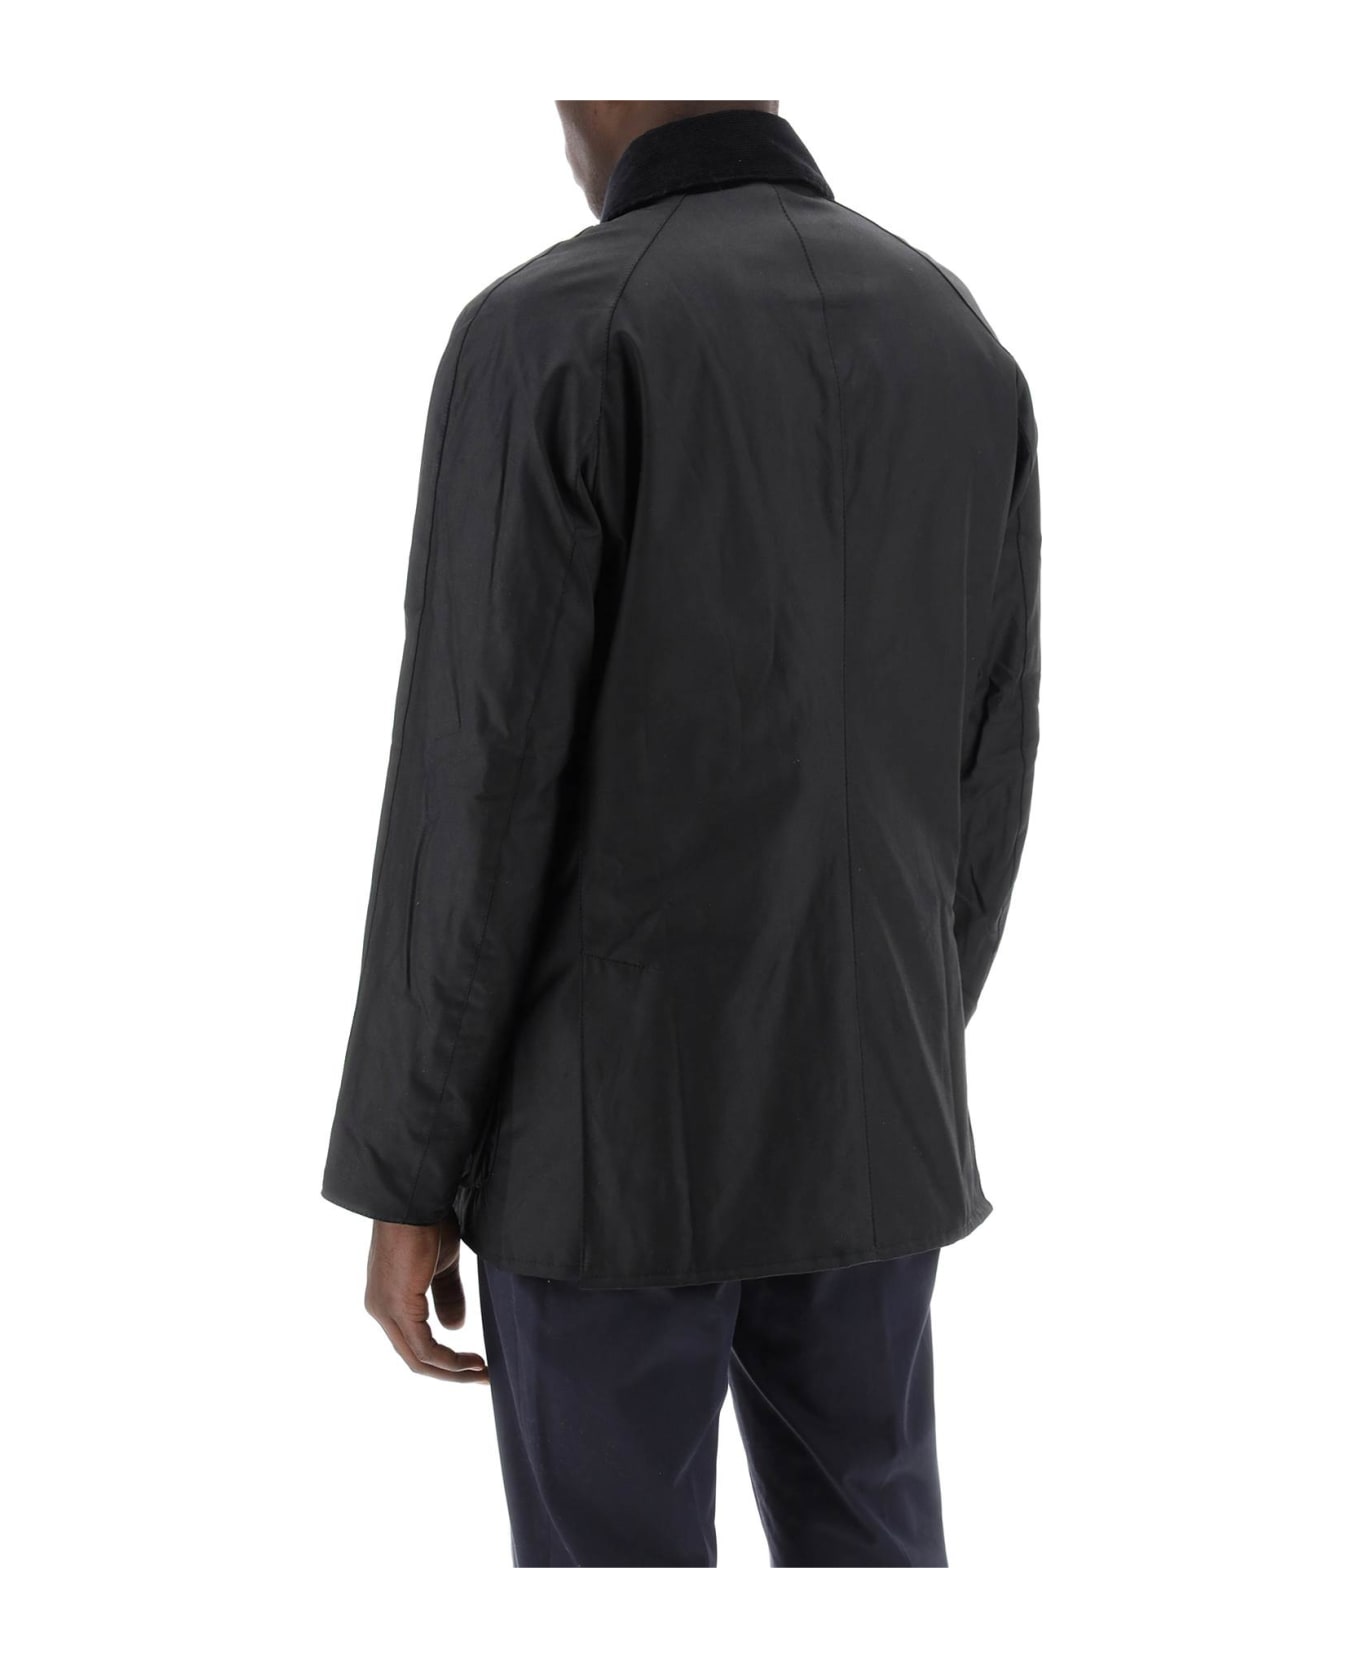 Barbour Ashby Waxed Jacket - BLACK (Black)